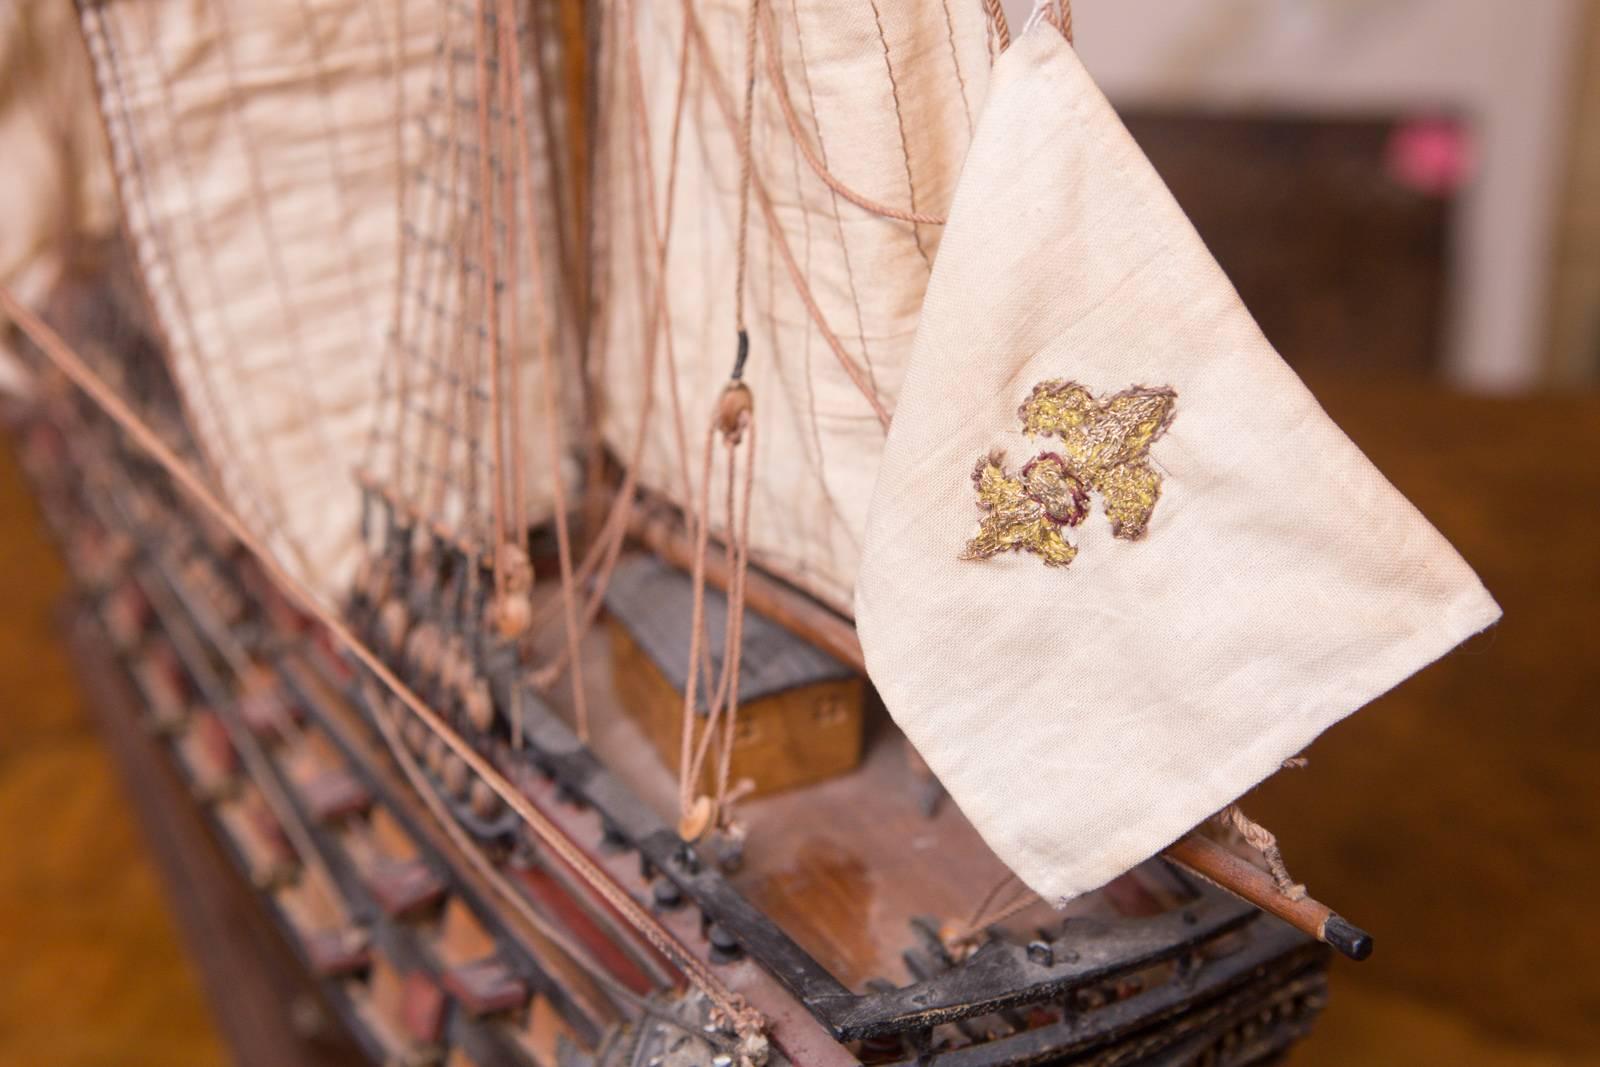 An antique model ship brought over from Paris in the mid-1990s. Absolutely stunning attention to detail with lovely gold fleur-de-lis on the front sail.

All rigging, sails and other small details are entirely intact.

Measures: 36” W x 32” H x